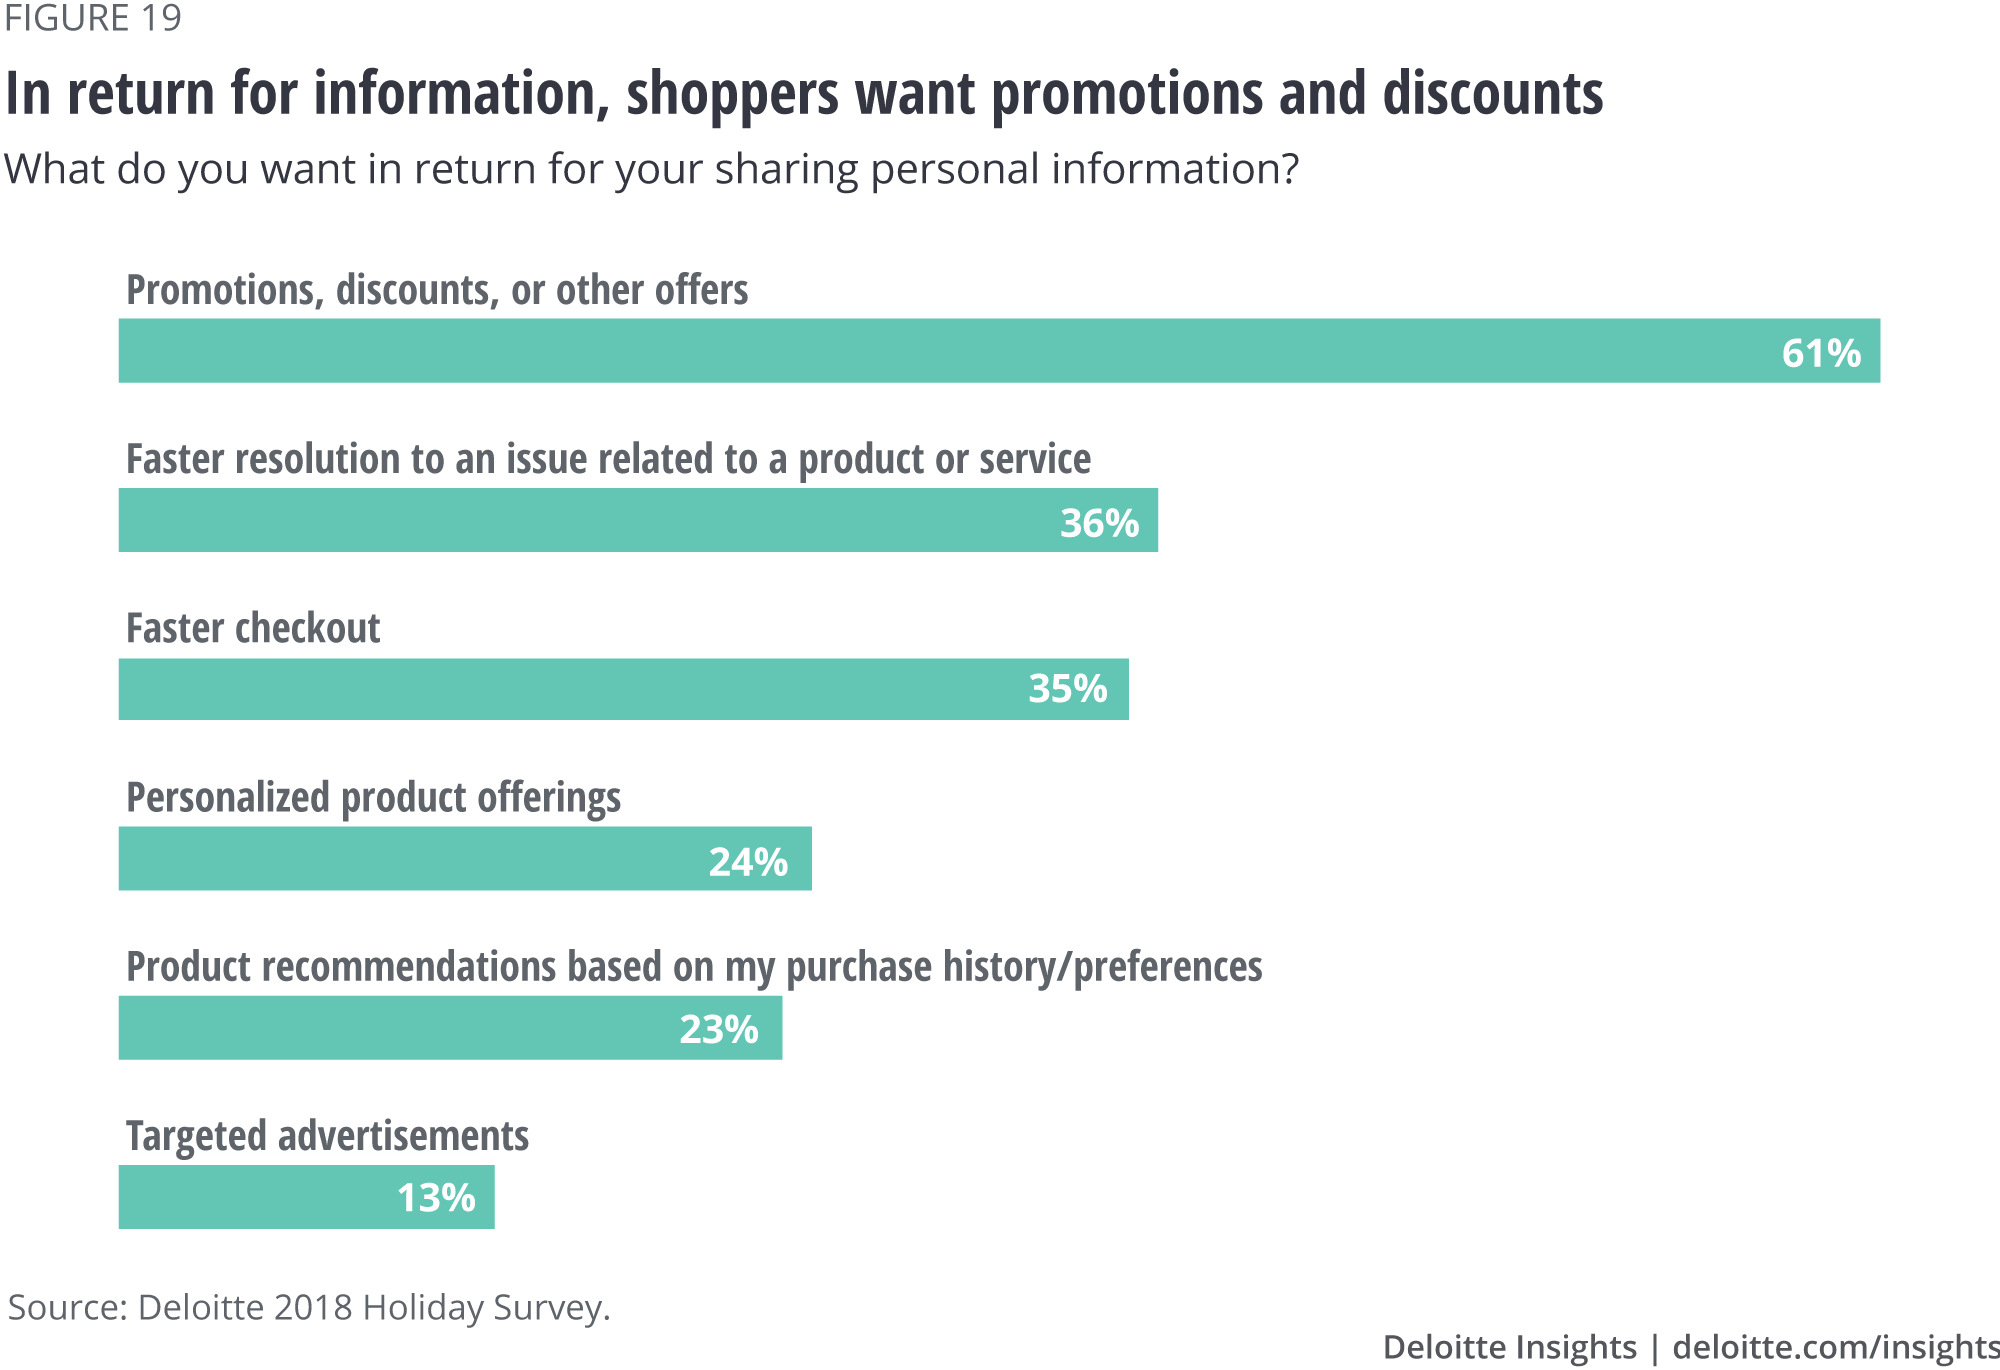 In return for information, shoppers want promotions and discounts